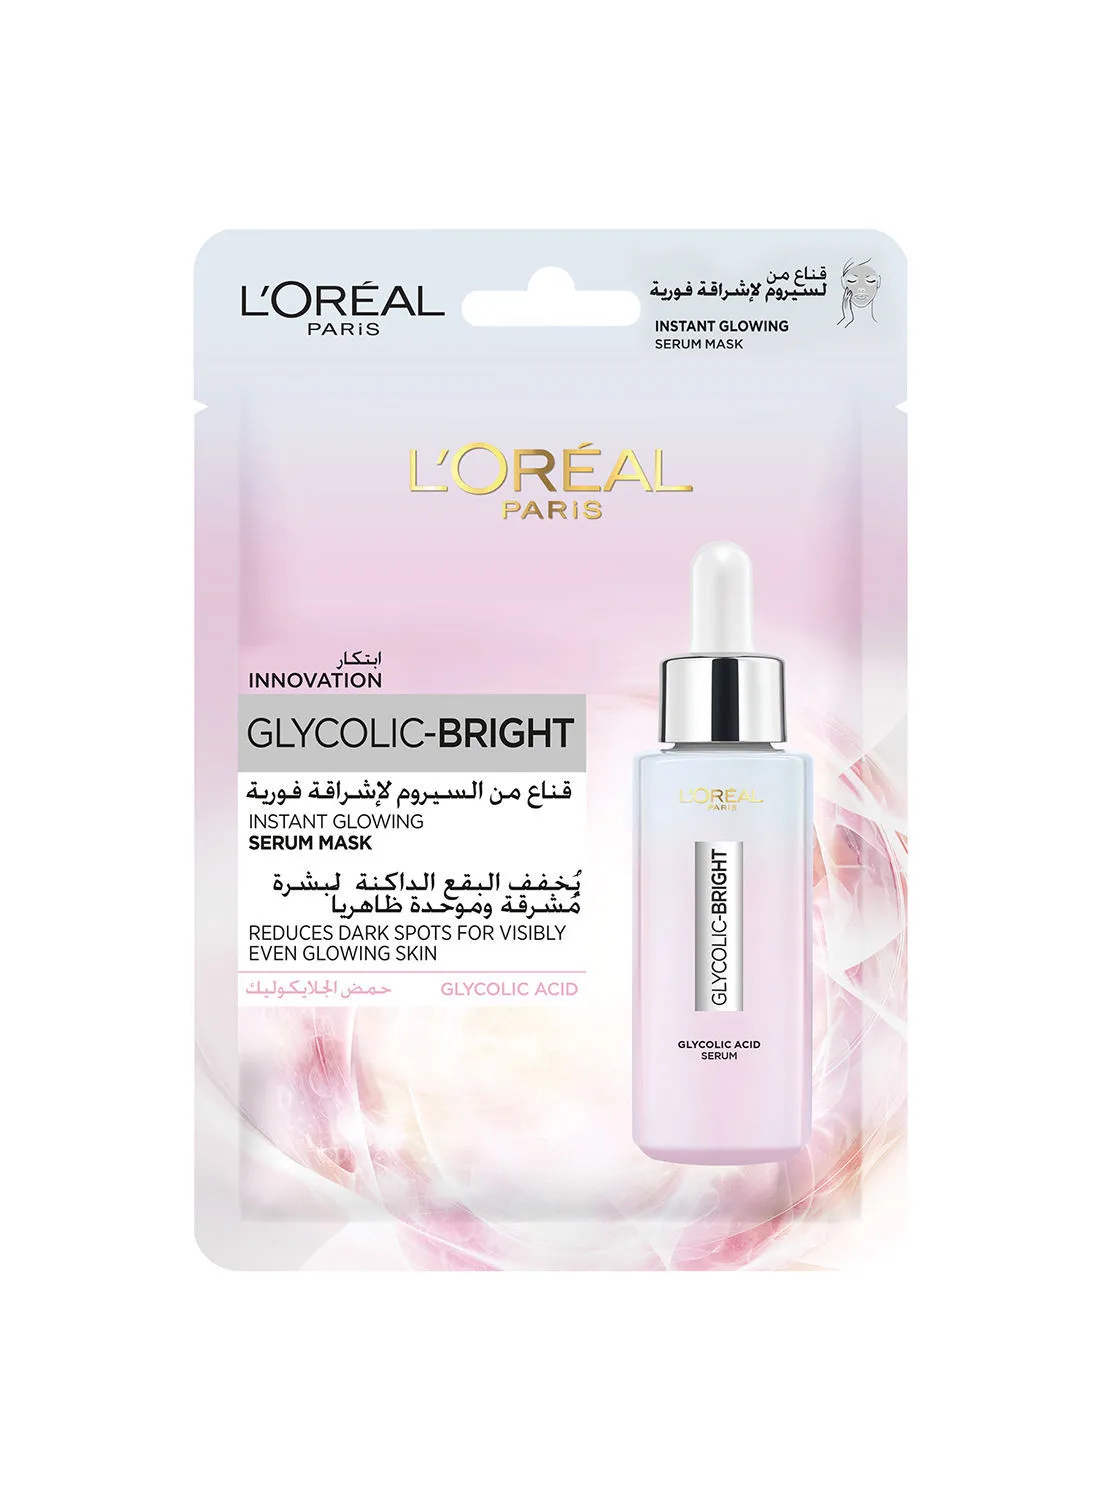 L'OREAL PARIS Glycolic Bright Instant Glowing Serum Mask